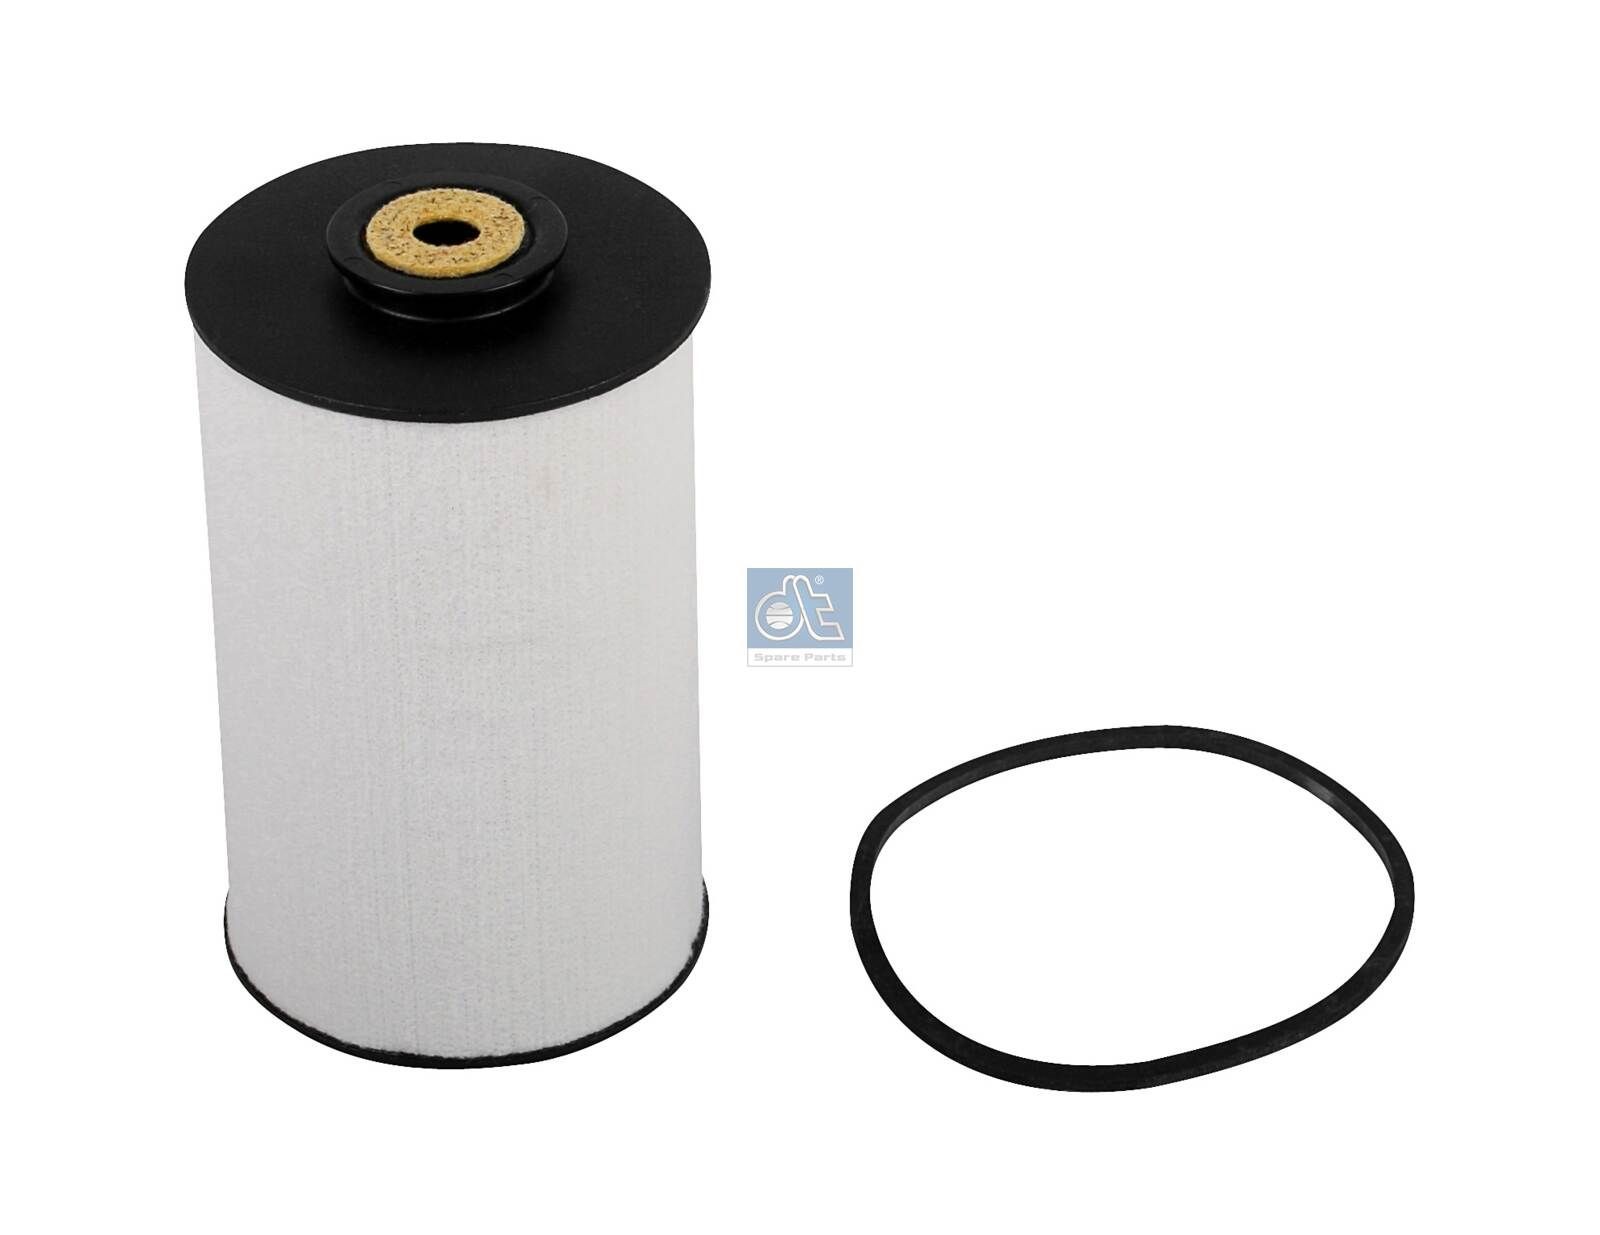 BFU 900 x DT Spare Parts 4.61531 Fuel filter 422 090 0051 67